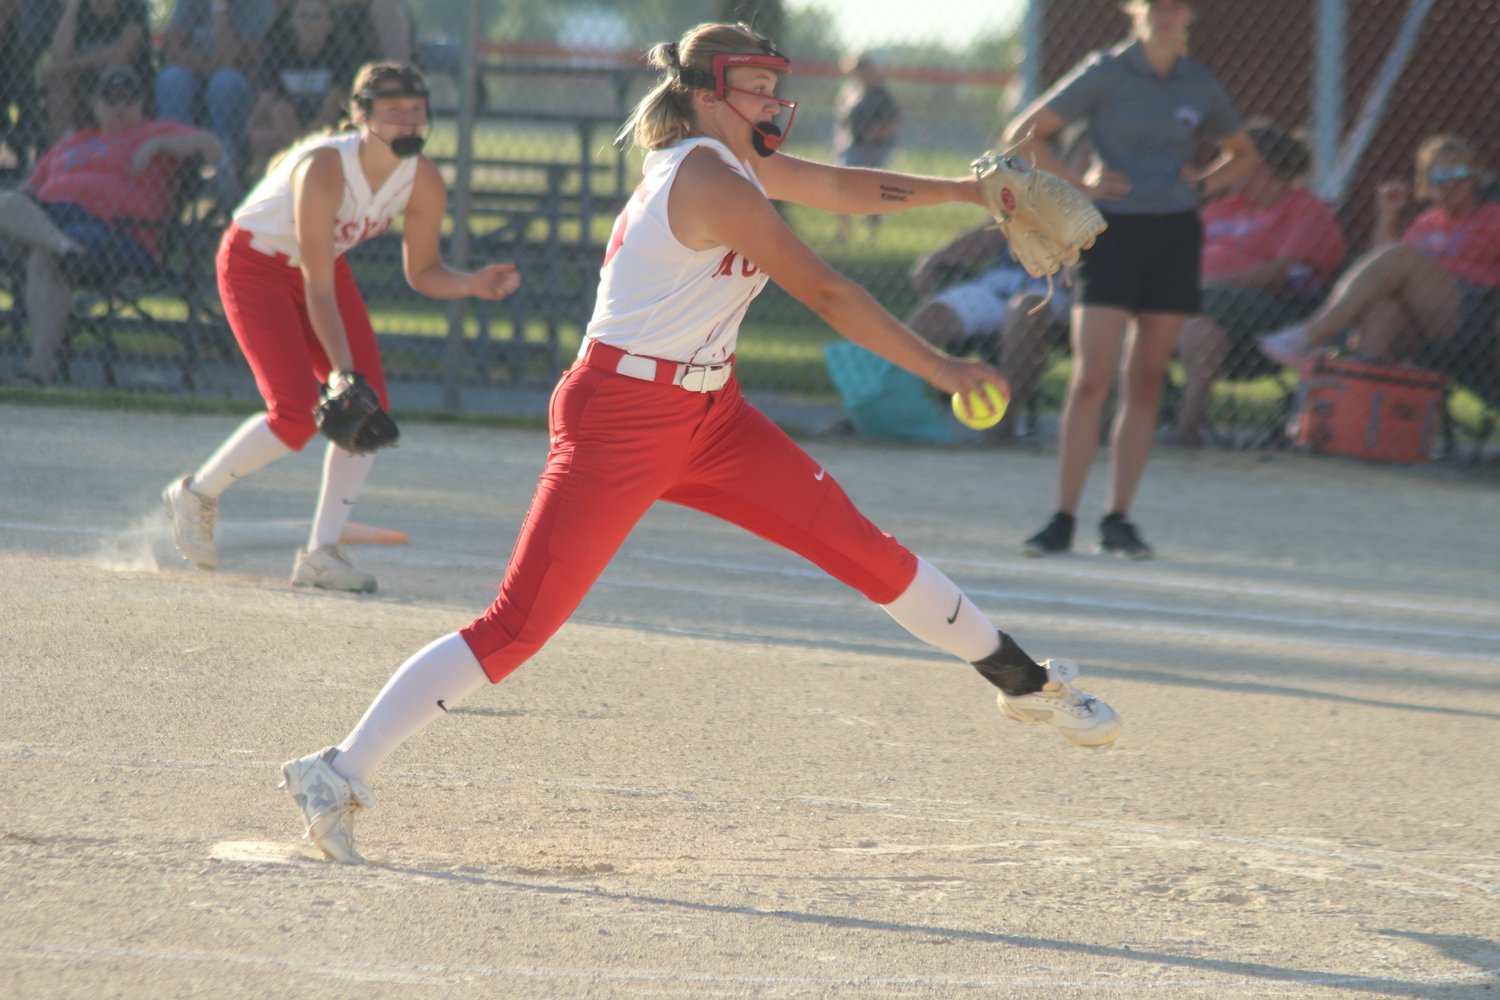 Highland sophomore Grace Batcheller sends a pitch on its way in Monday’s game against Hillcrest.